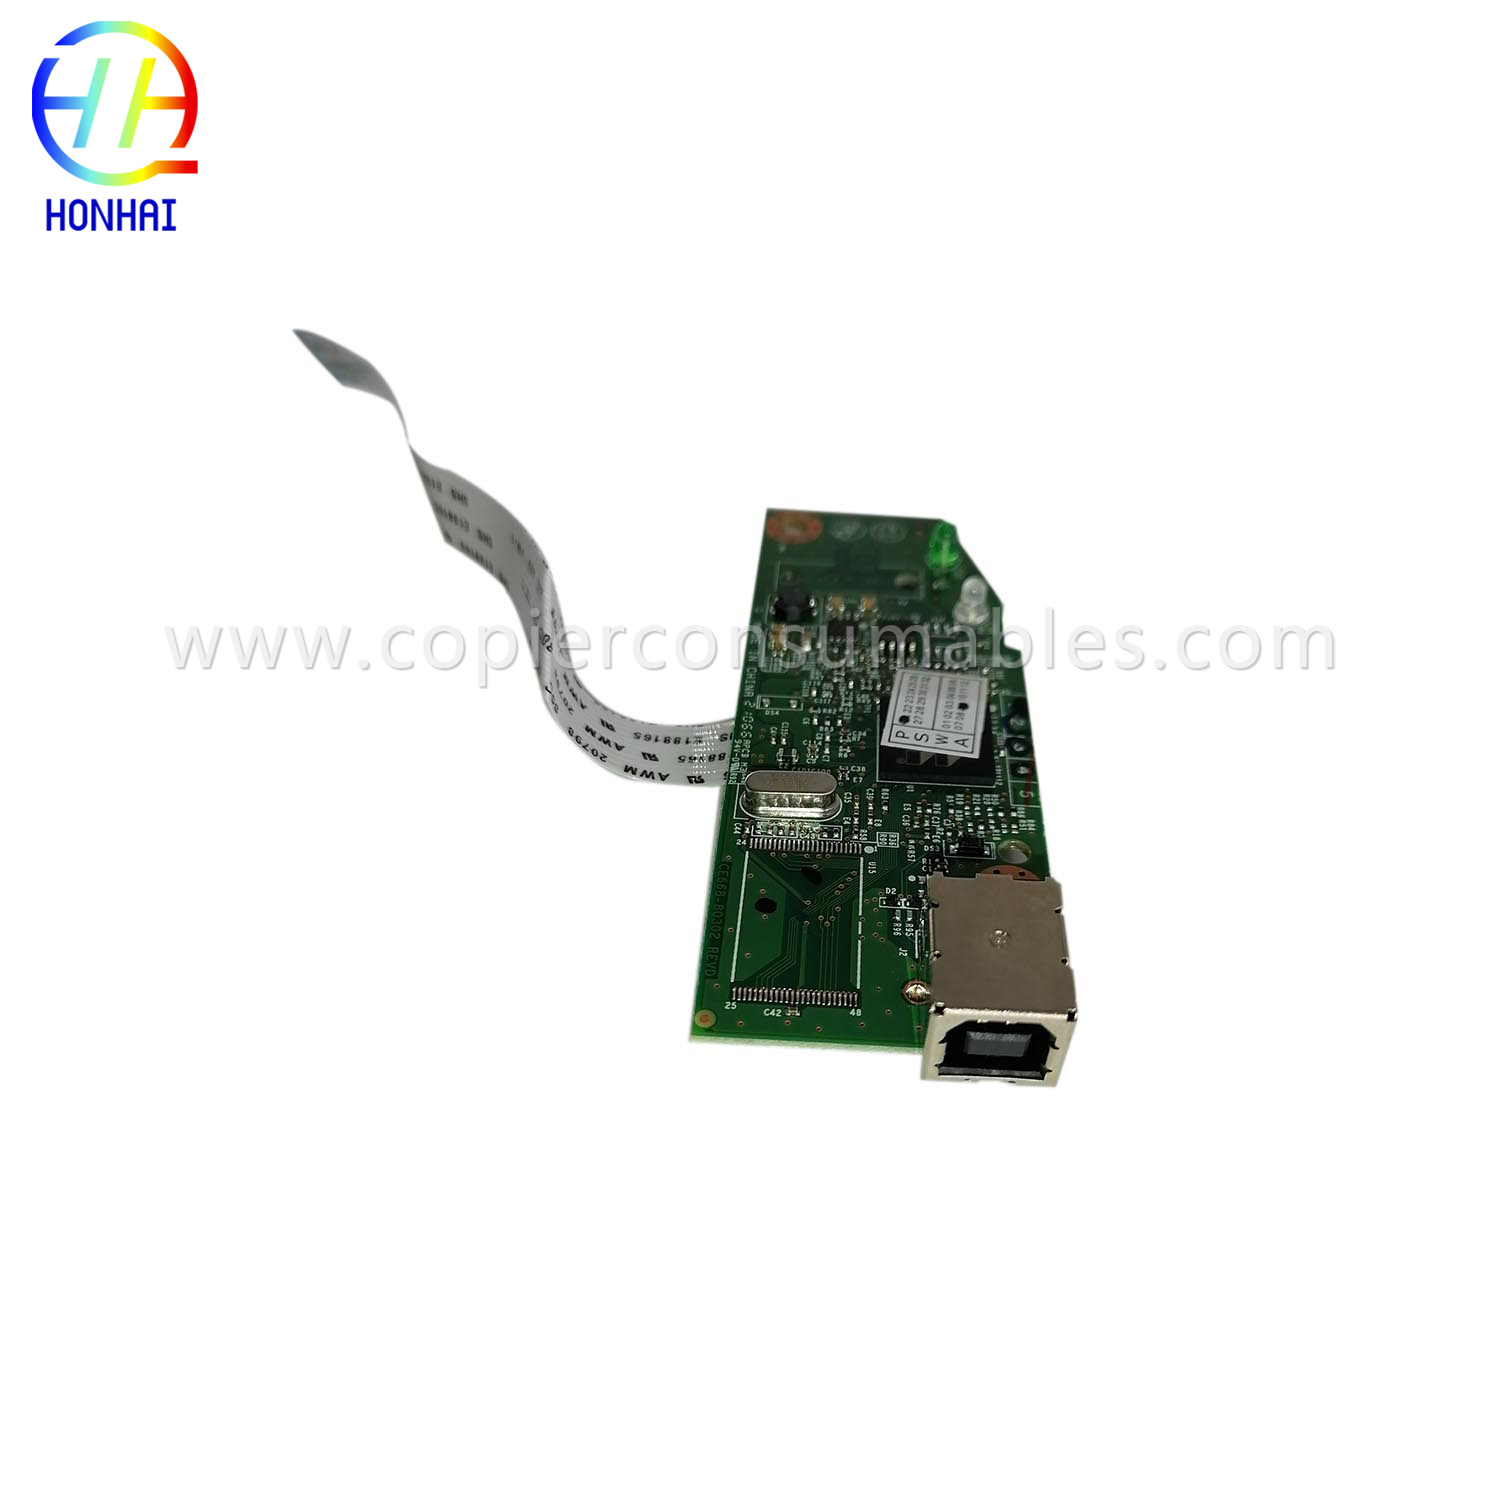 MAIN BOARD FOR HP Laser jet 1102 RM1-7600-020CN (4) 拷贝